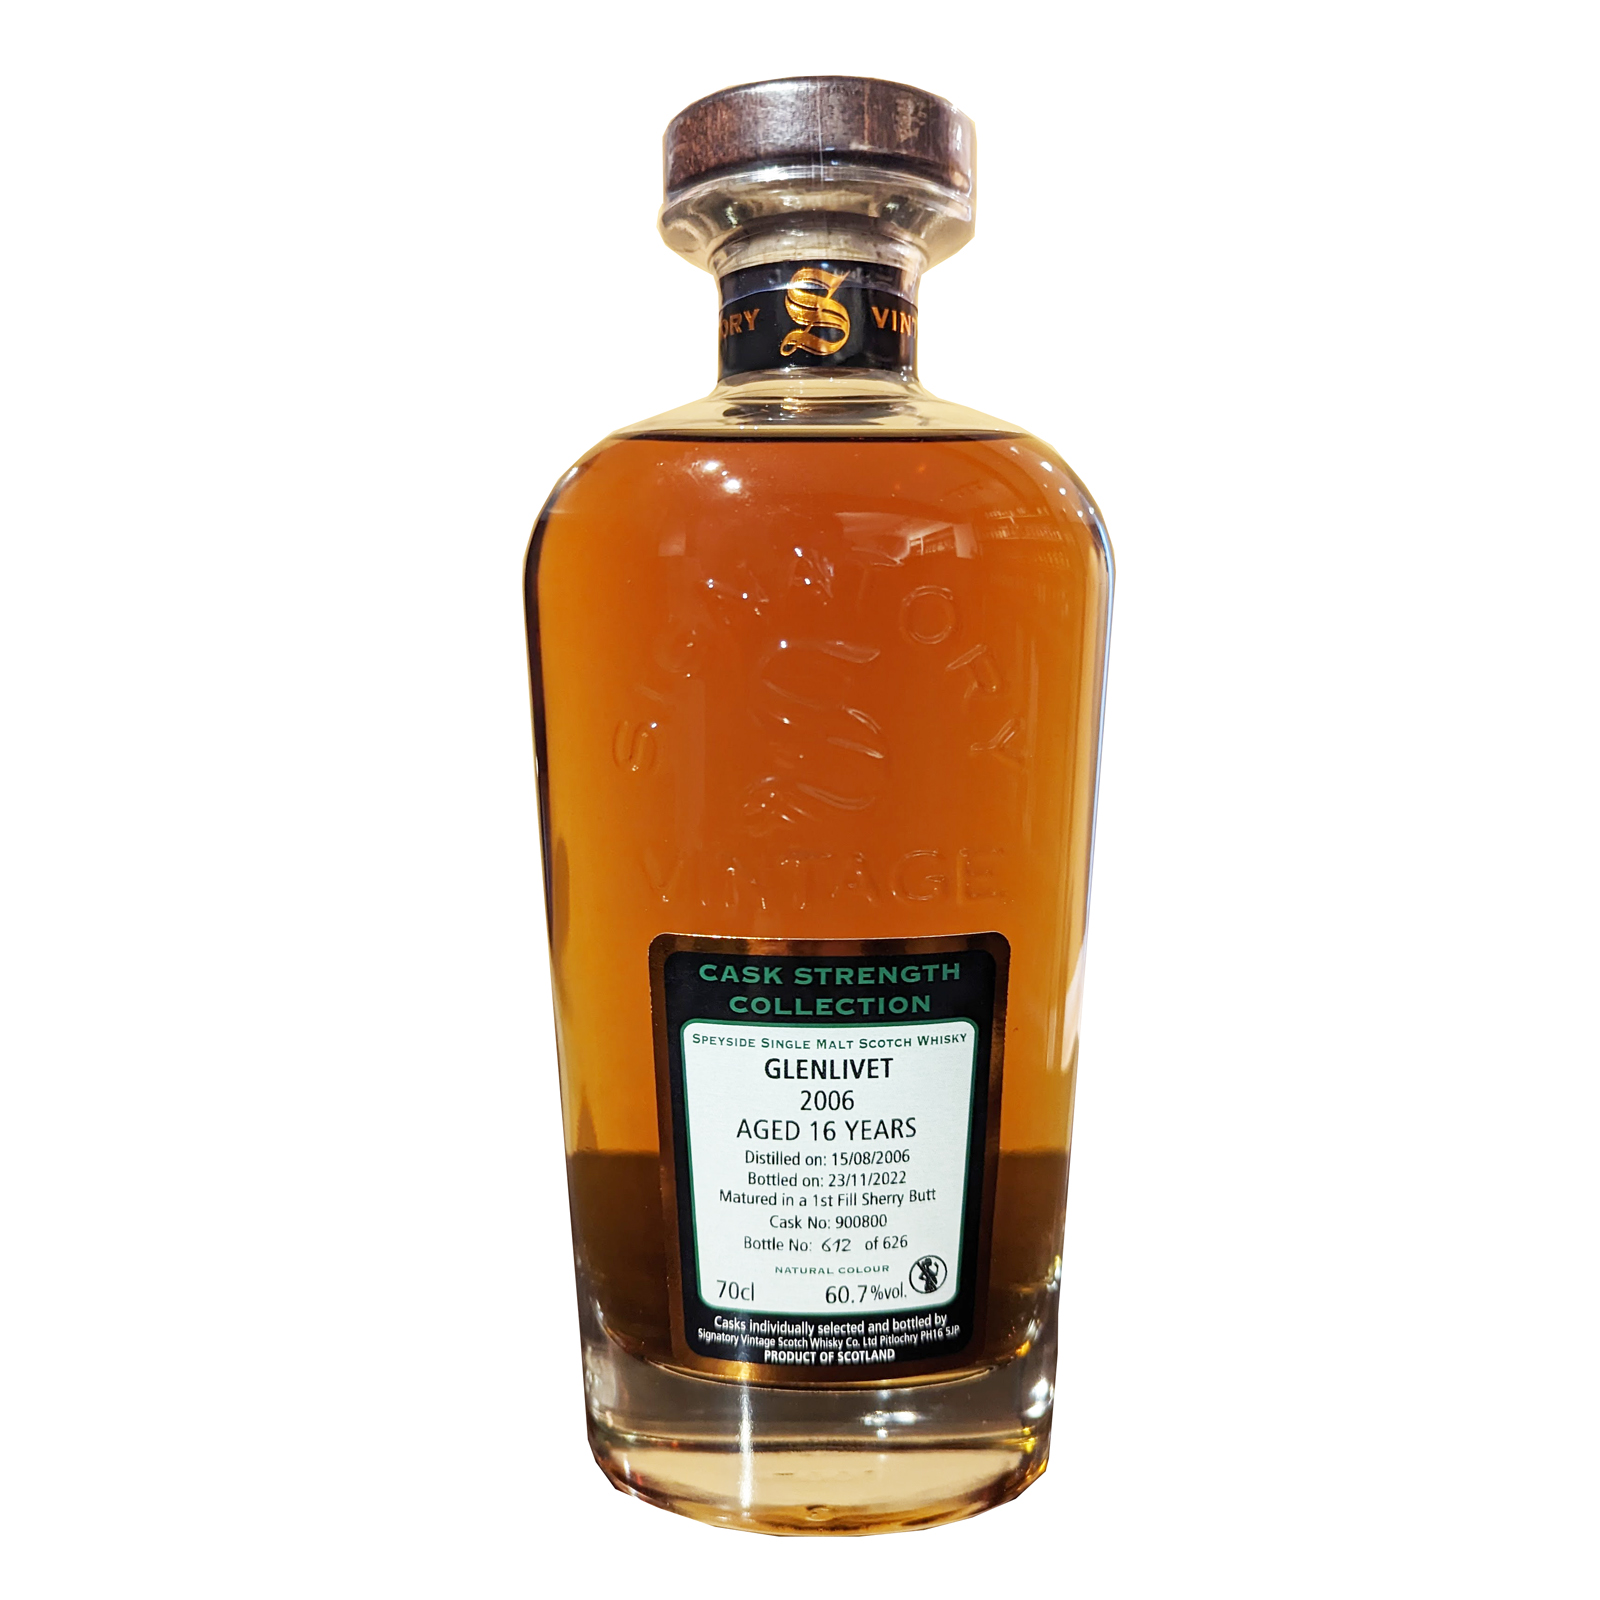 You are currently viewing Glenlivet 2006 16 years – cask #900800